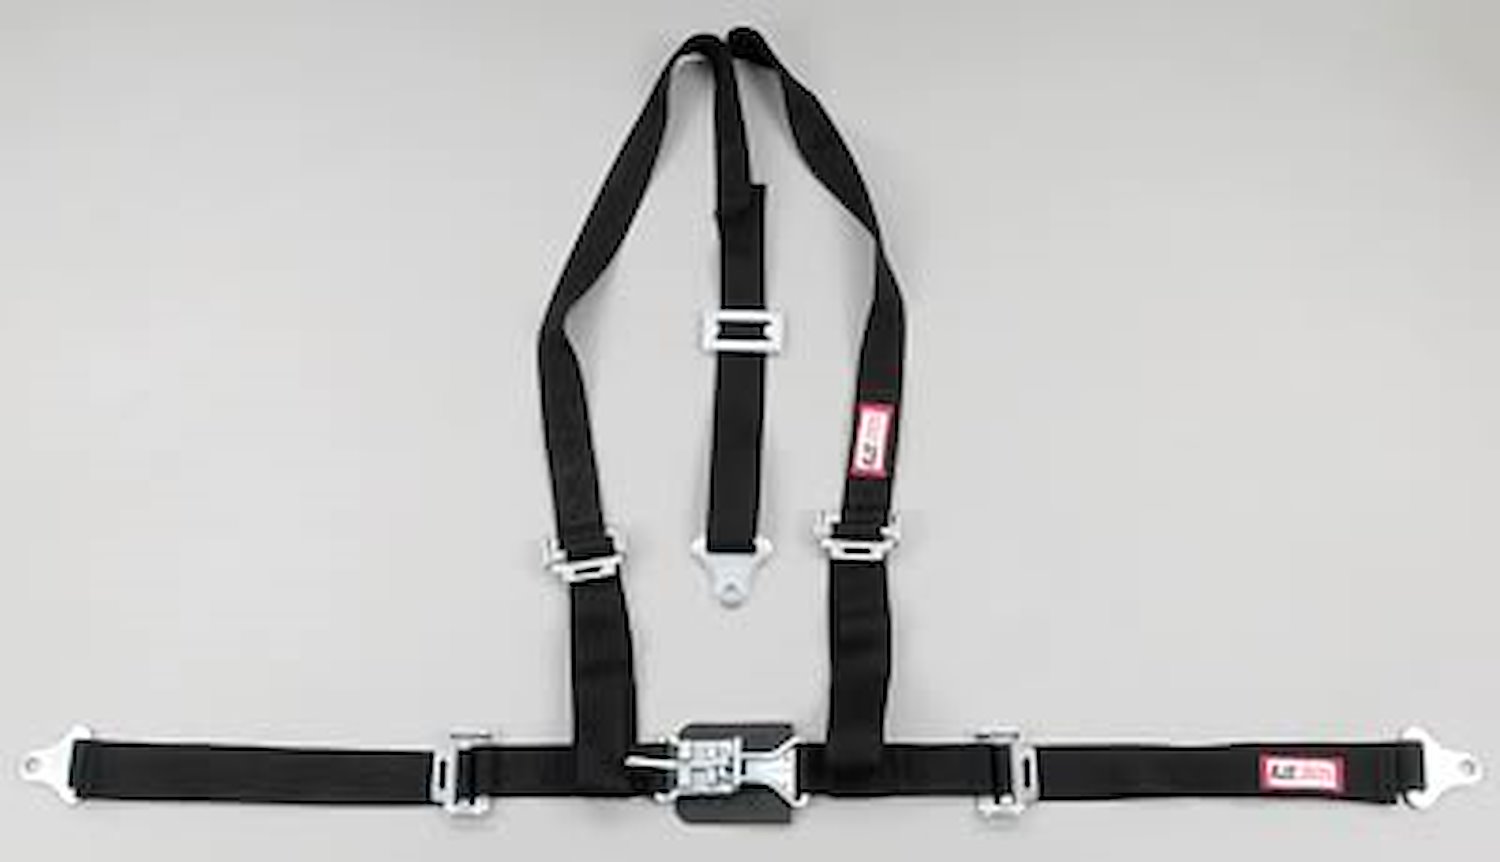 NON-SFI L&L HARNESS 3 PULL UP Lap Belt BOLT SEWN IN 2 S.H. Y FLOOR Mount w/STERNUM STRAP WRAP/BOLT RED